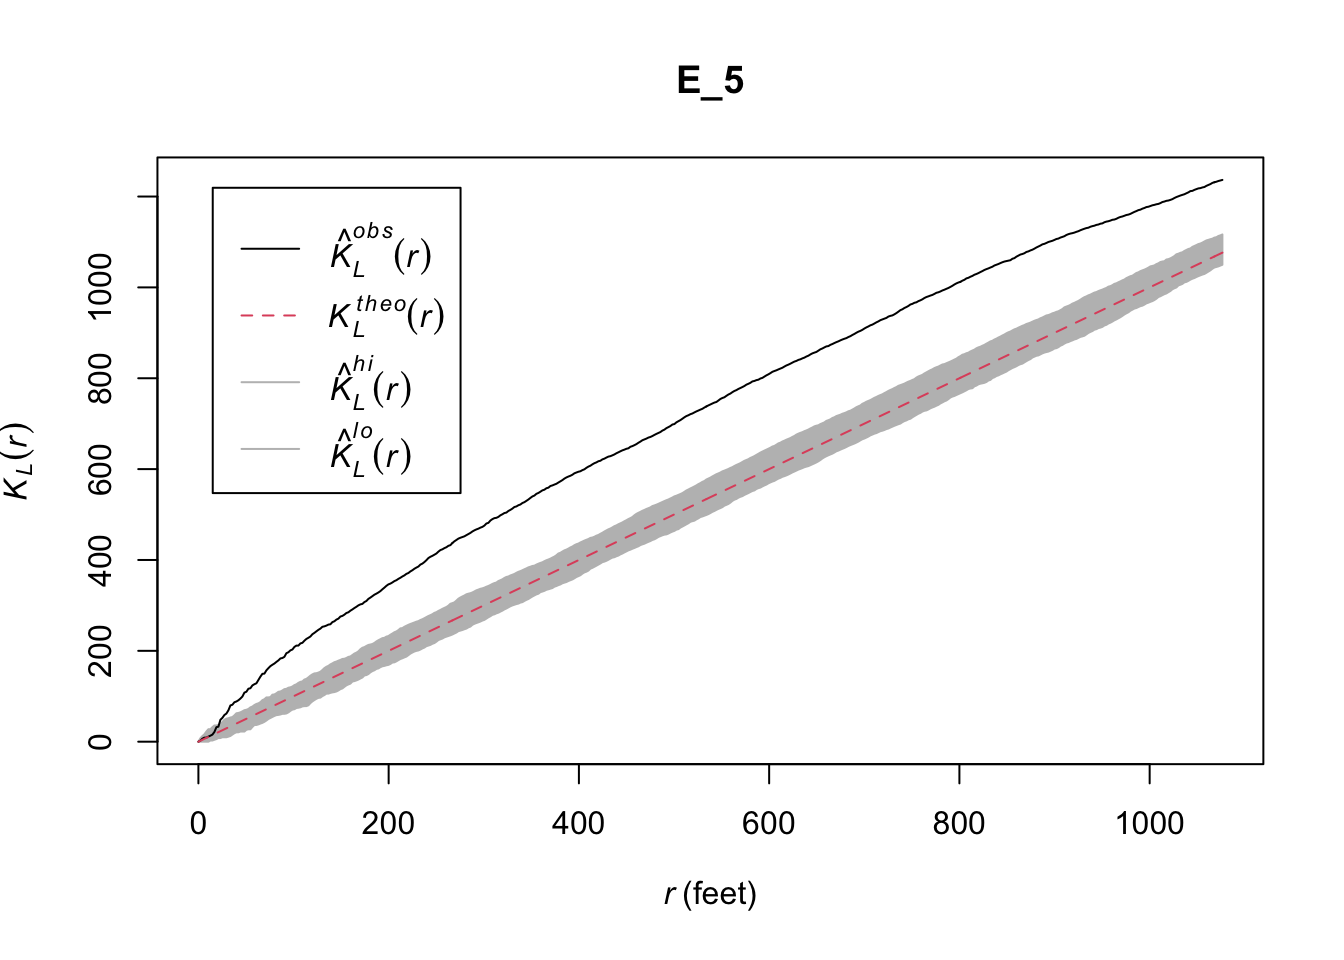 This time we plot 'K L of r' against 'r in feet' up to eleven hundred. The curve labeled 'K theo of r' is a straight line from the origin, with an envelope that increases in width near zero. The curve 'K hat obs of r' escapes this envelope after just a few feet, and stays well above it further on.